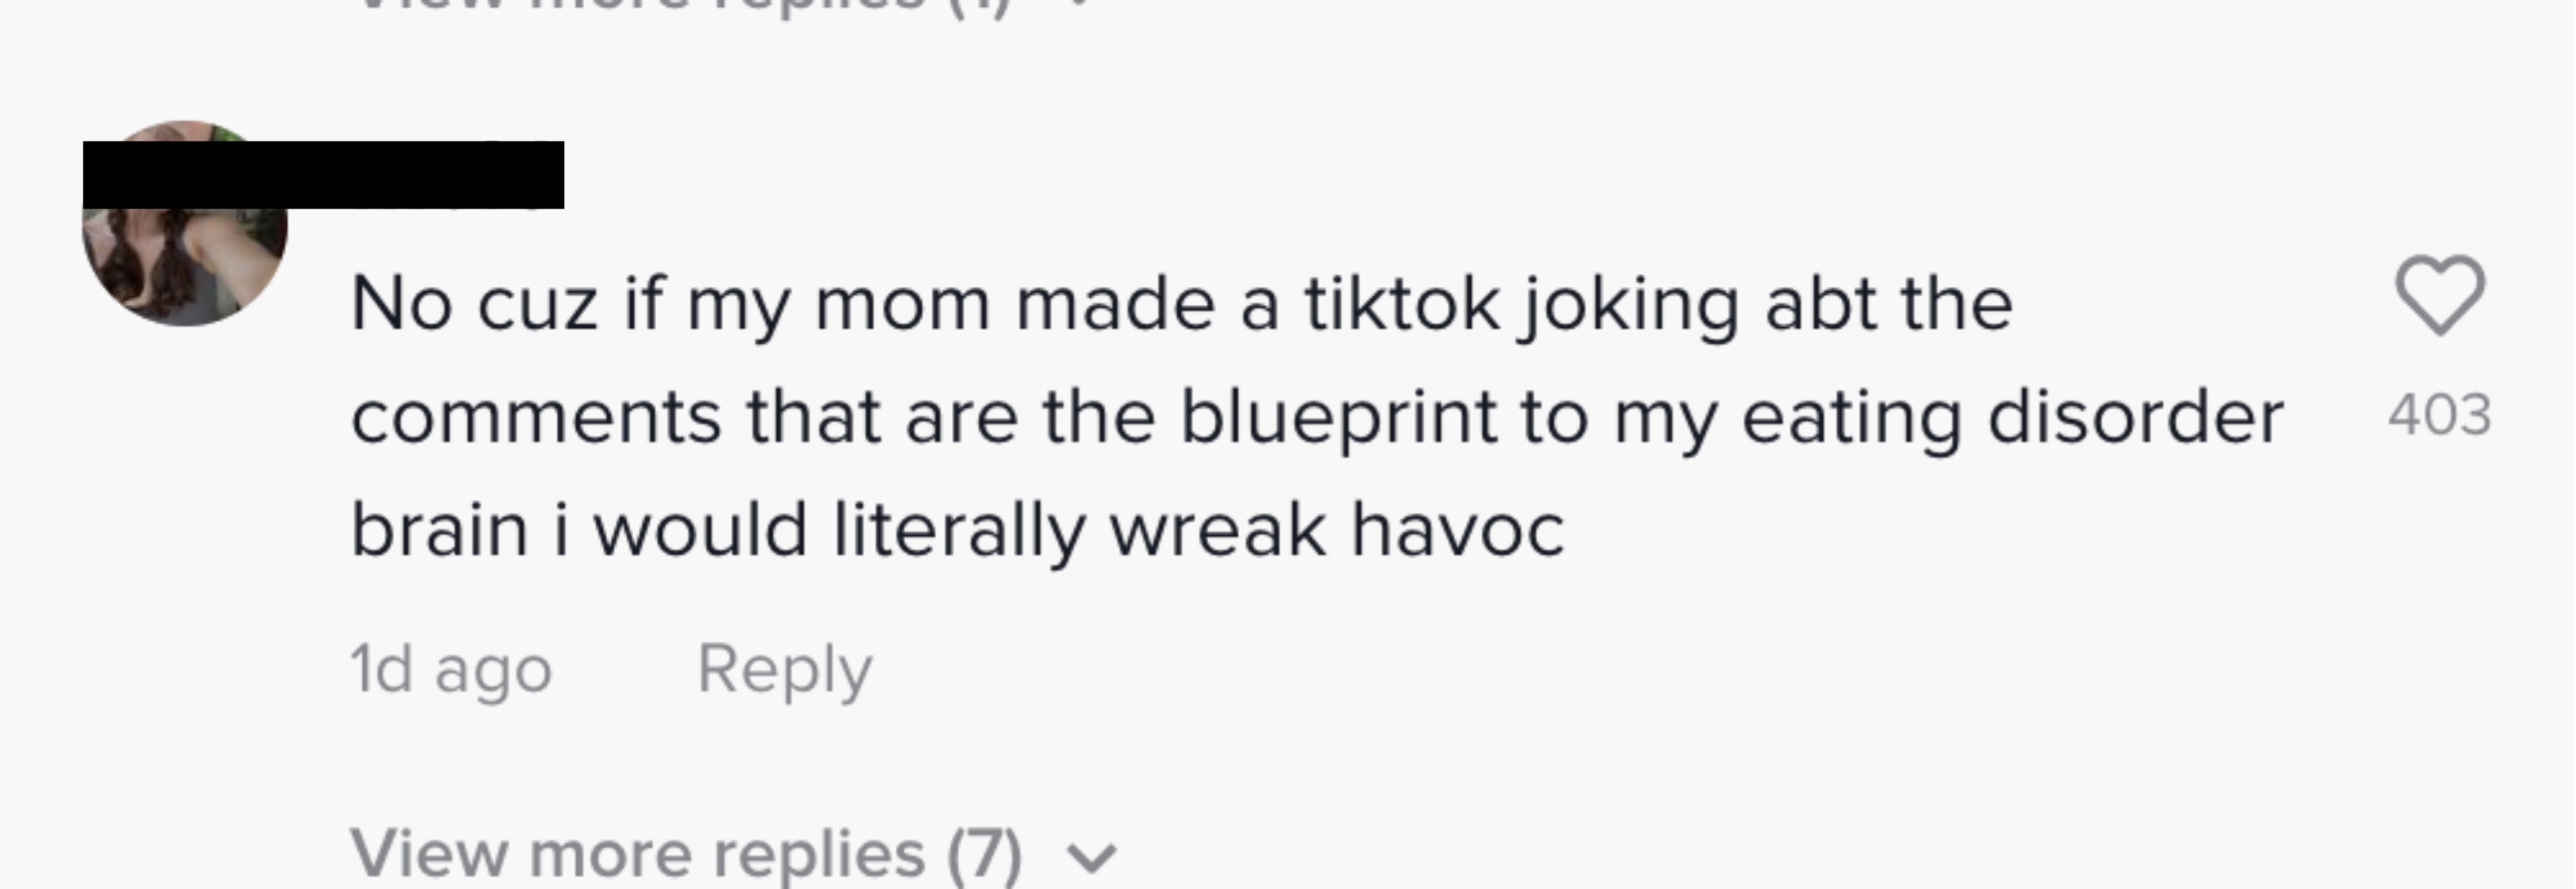 commenter saying if their mom did that they would wreak havoc